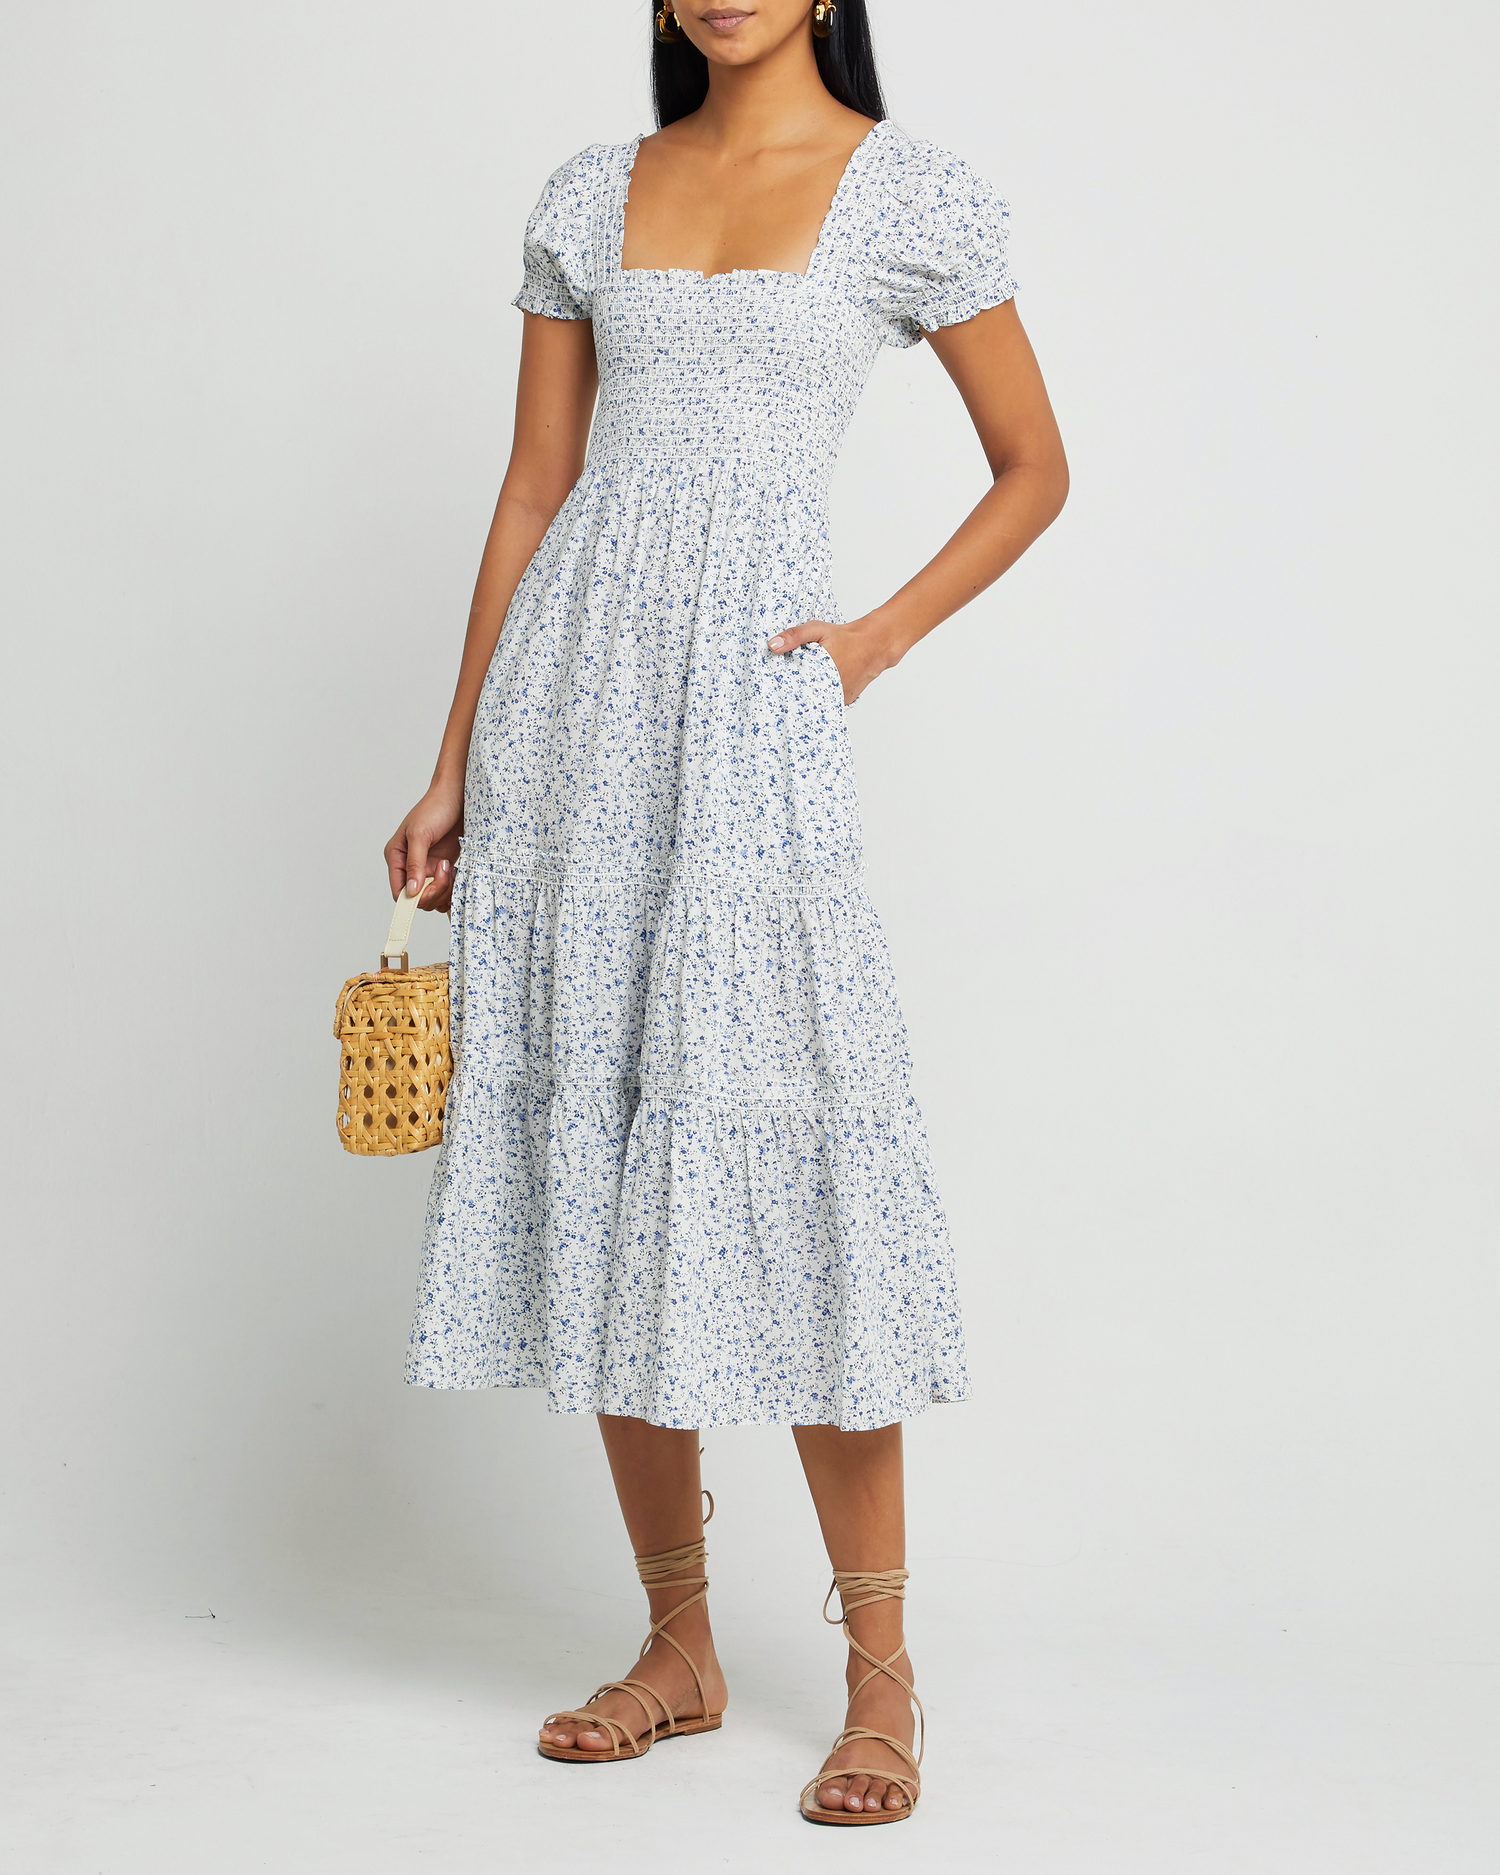 First image of Square Neck Smocked Maxi Dress, a blue maxi dress, smocked, puff sleeves, short sleeves, floral